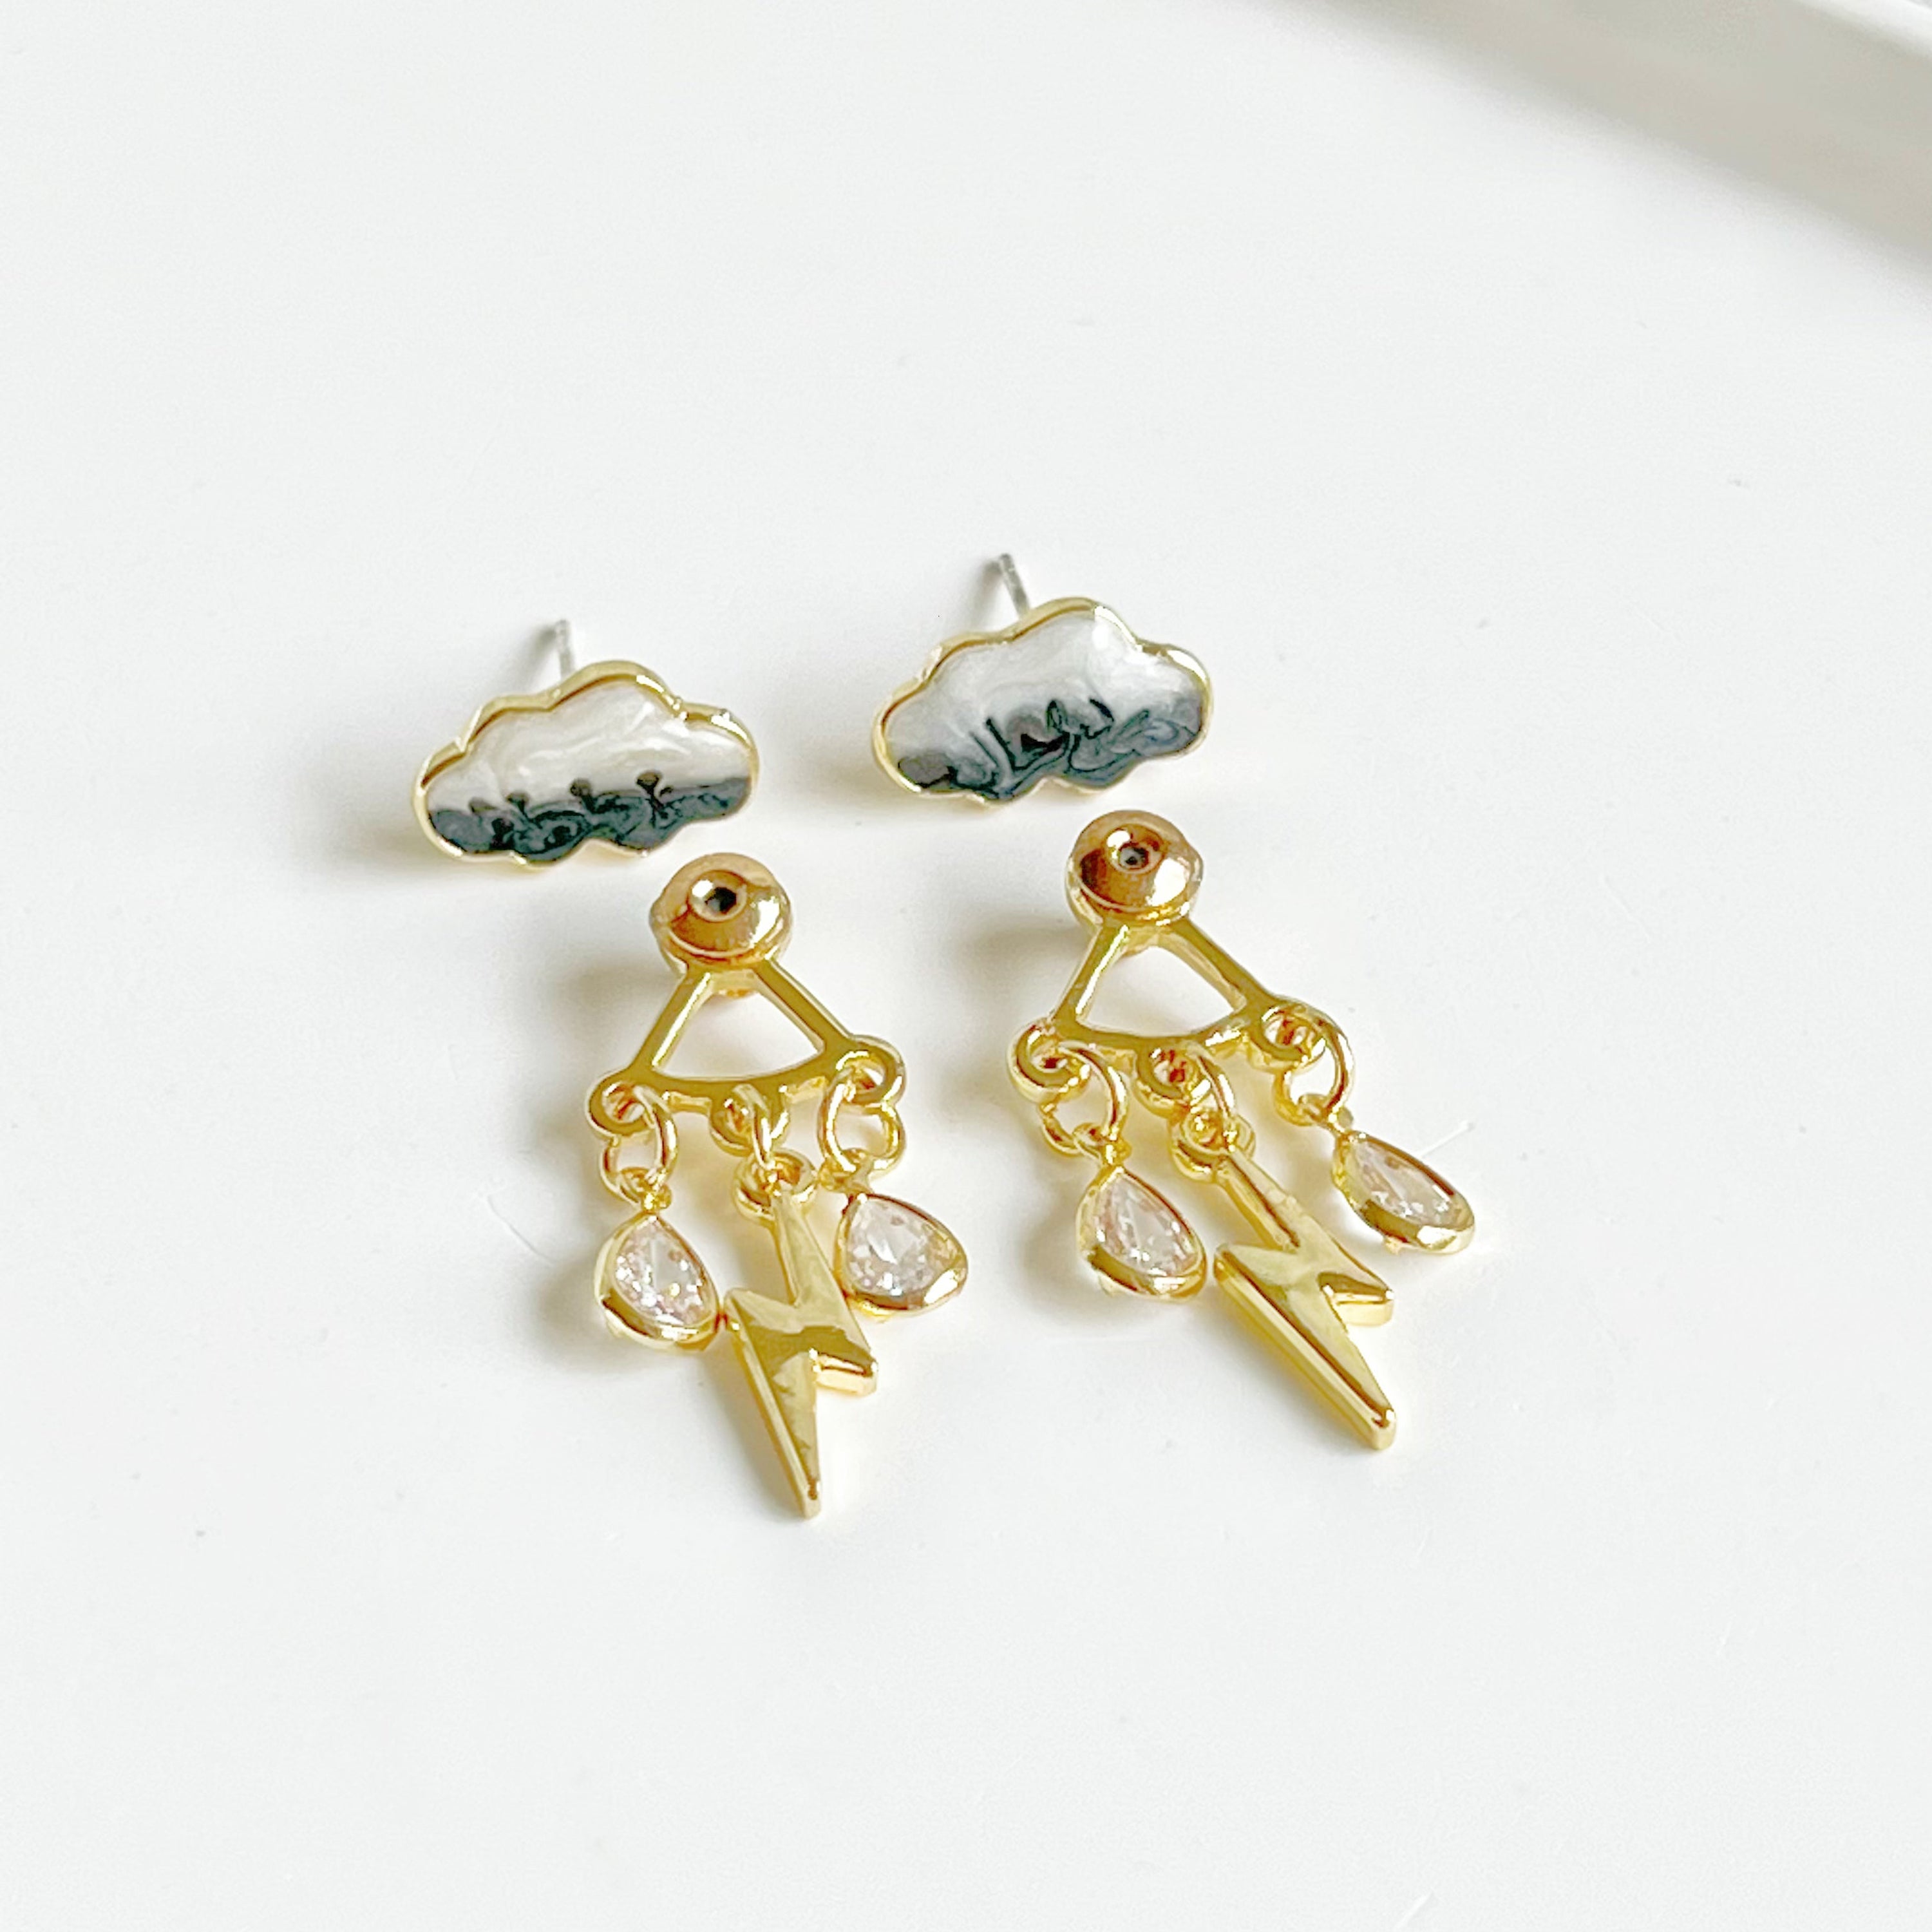 Handmade Thunderstorm Rain Cloud Earrings - Positive Symbol of Rainbows and Positivity in Sterling Silver and Gold Plated Bronze - Jewelry & Watches - Bijou Her -  -  - 